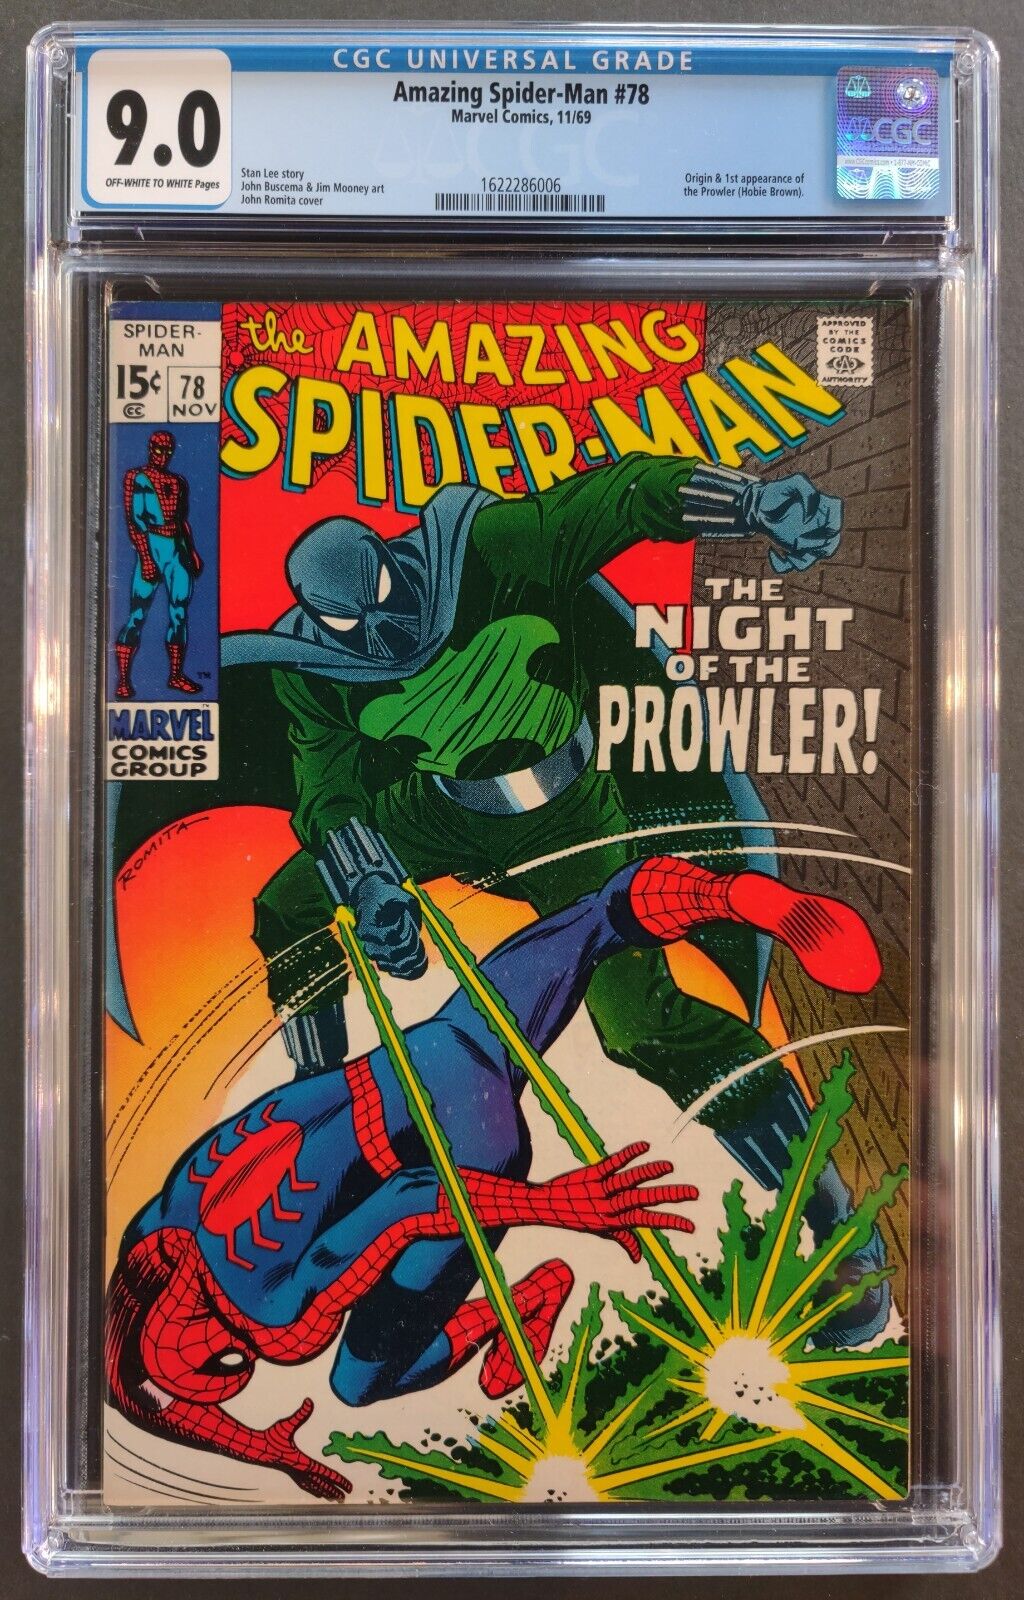 AMAZING SPIDER-MAN #78 CGC 9.0 MARVEL COMICS 1969 1ST APPEARANCE OF THE PROWLER